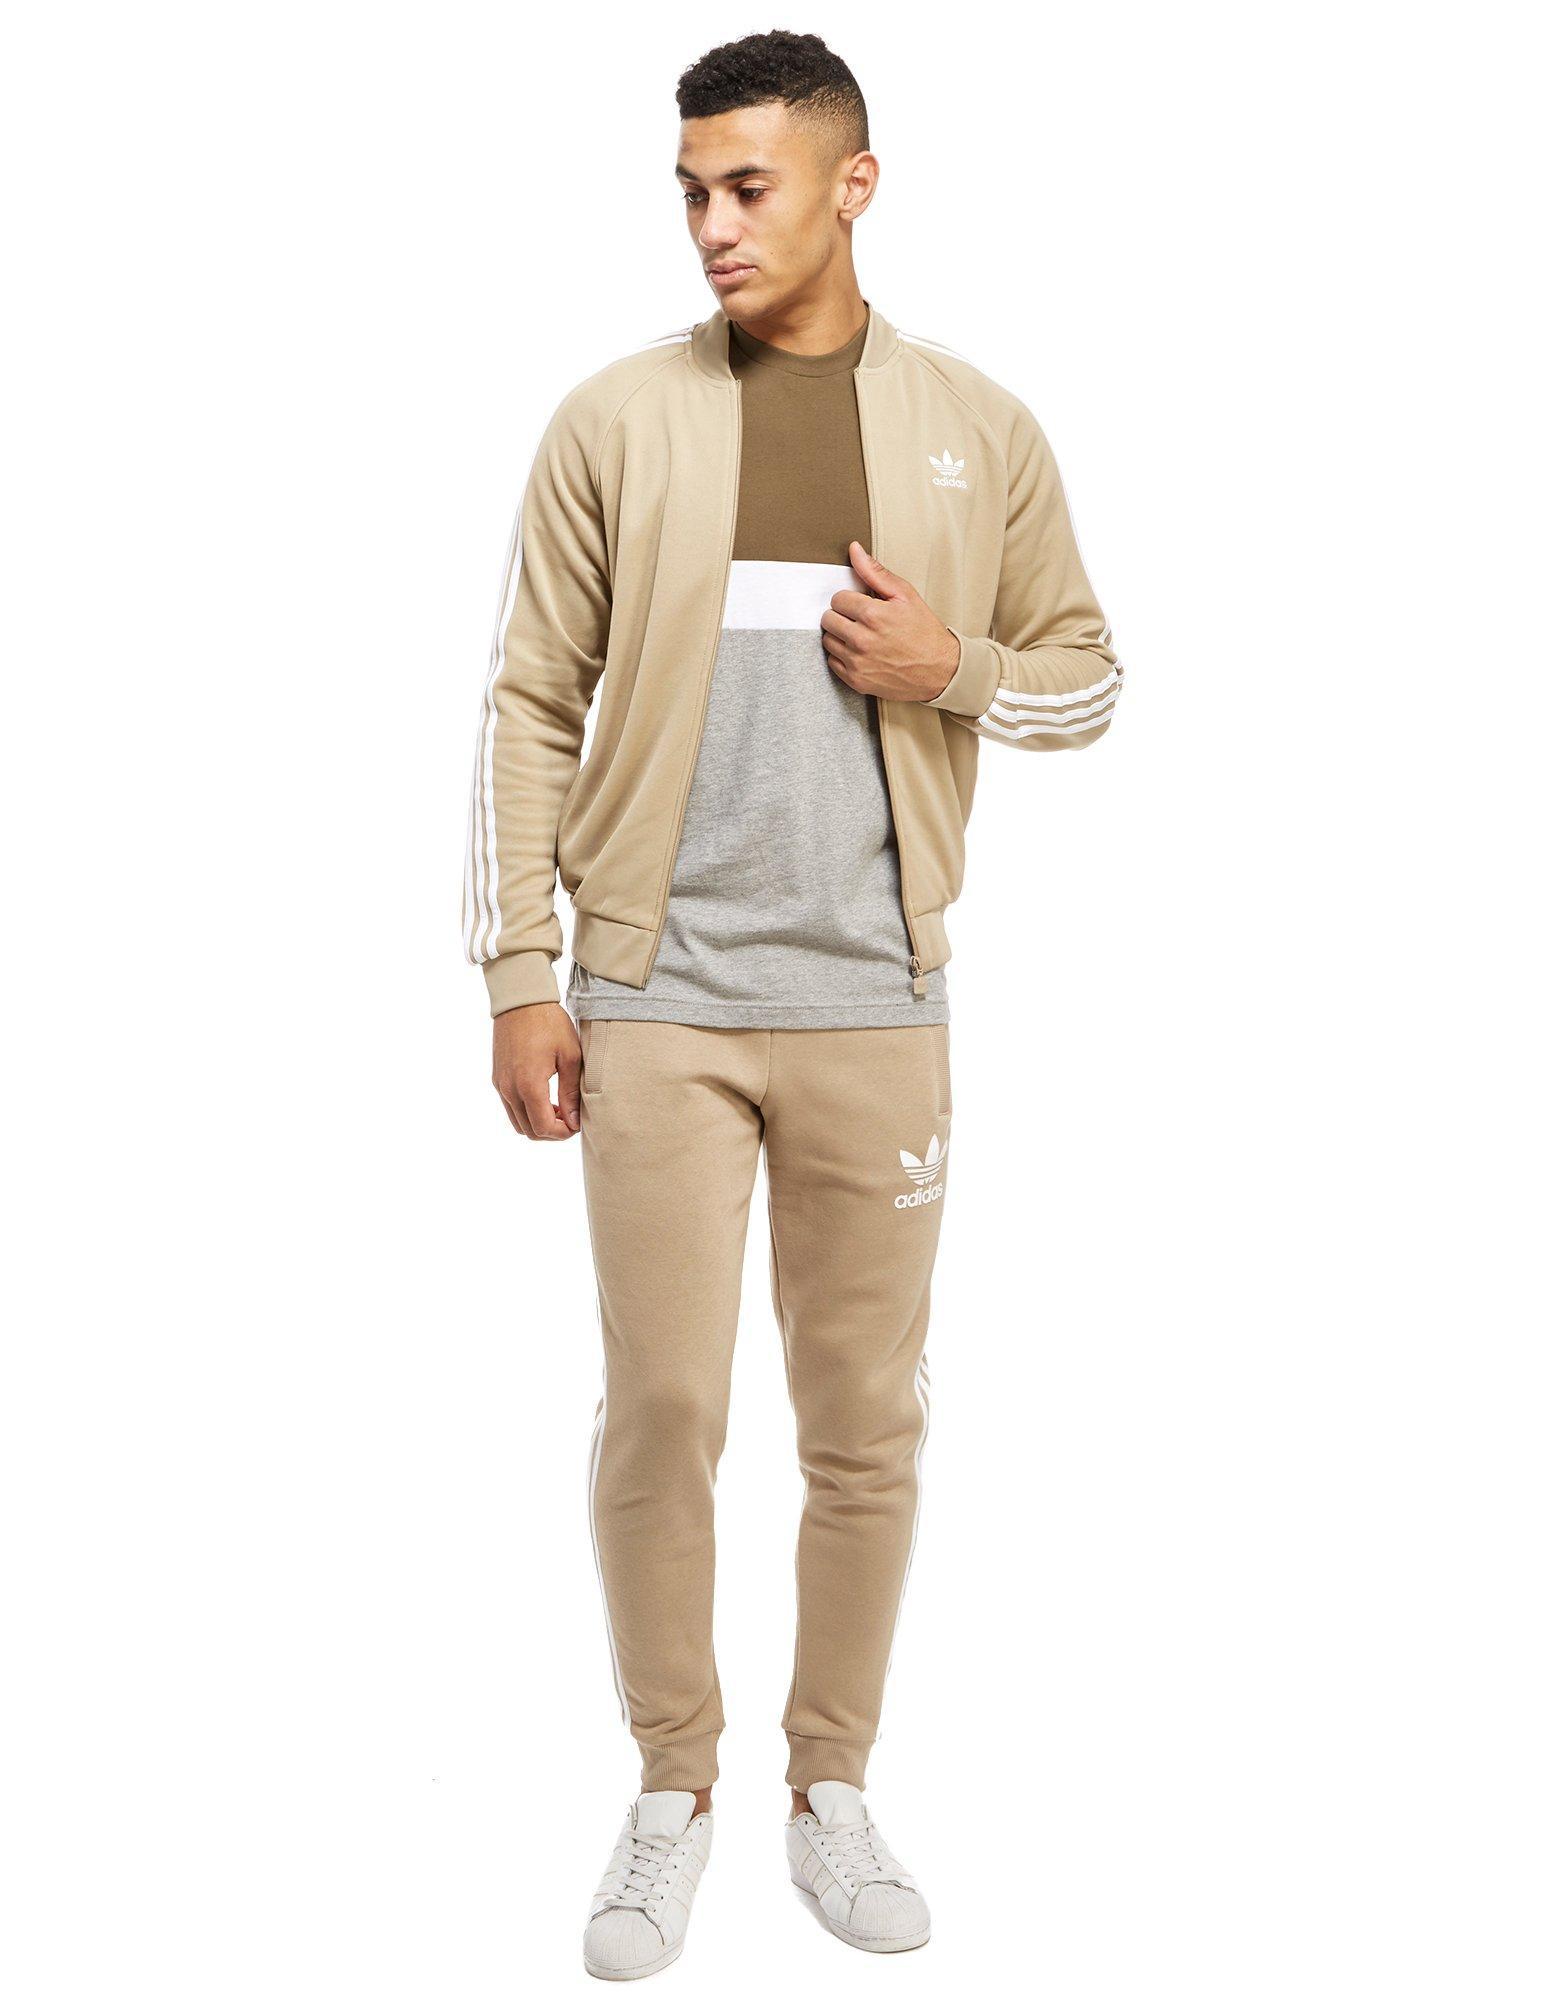 adidas Originals Fleece California Cuffed Track Pants in Stone/White  (Natural) for Men - Lyst